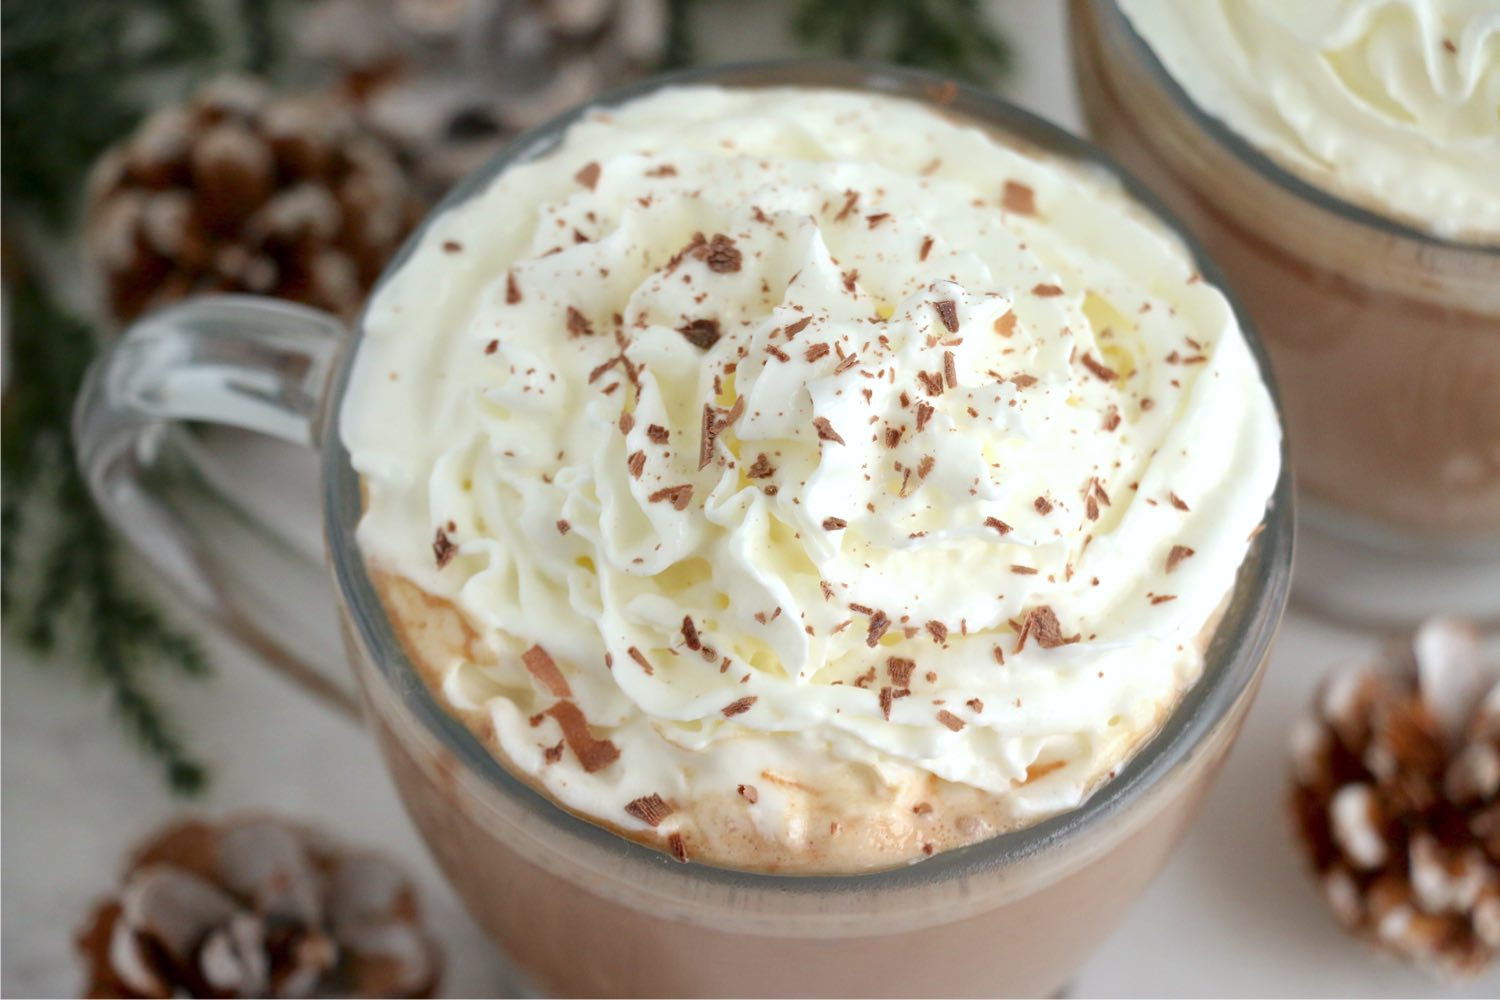 mug of hot chocolate with whipped topping